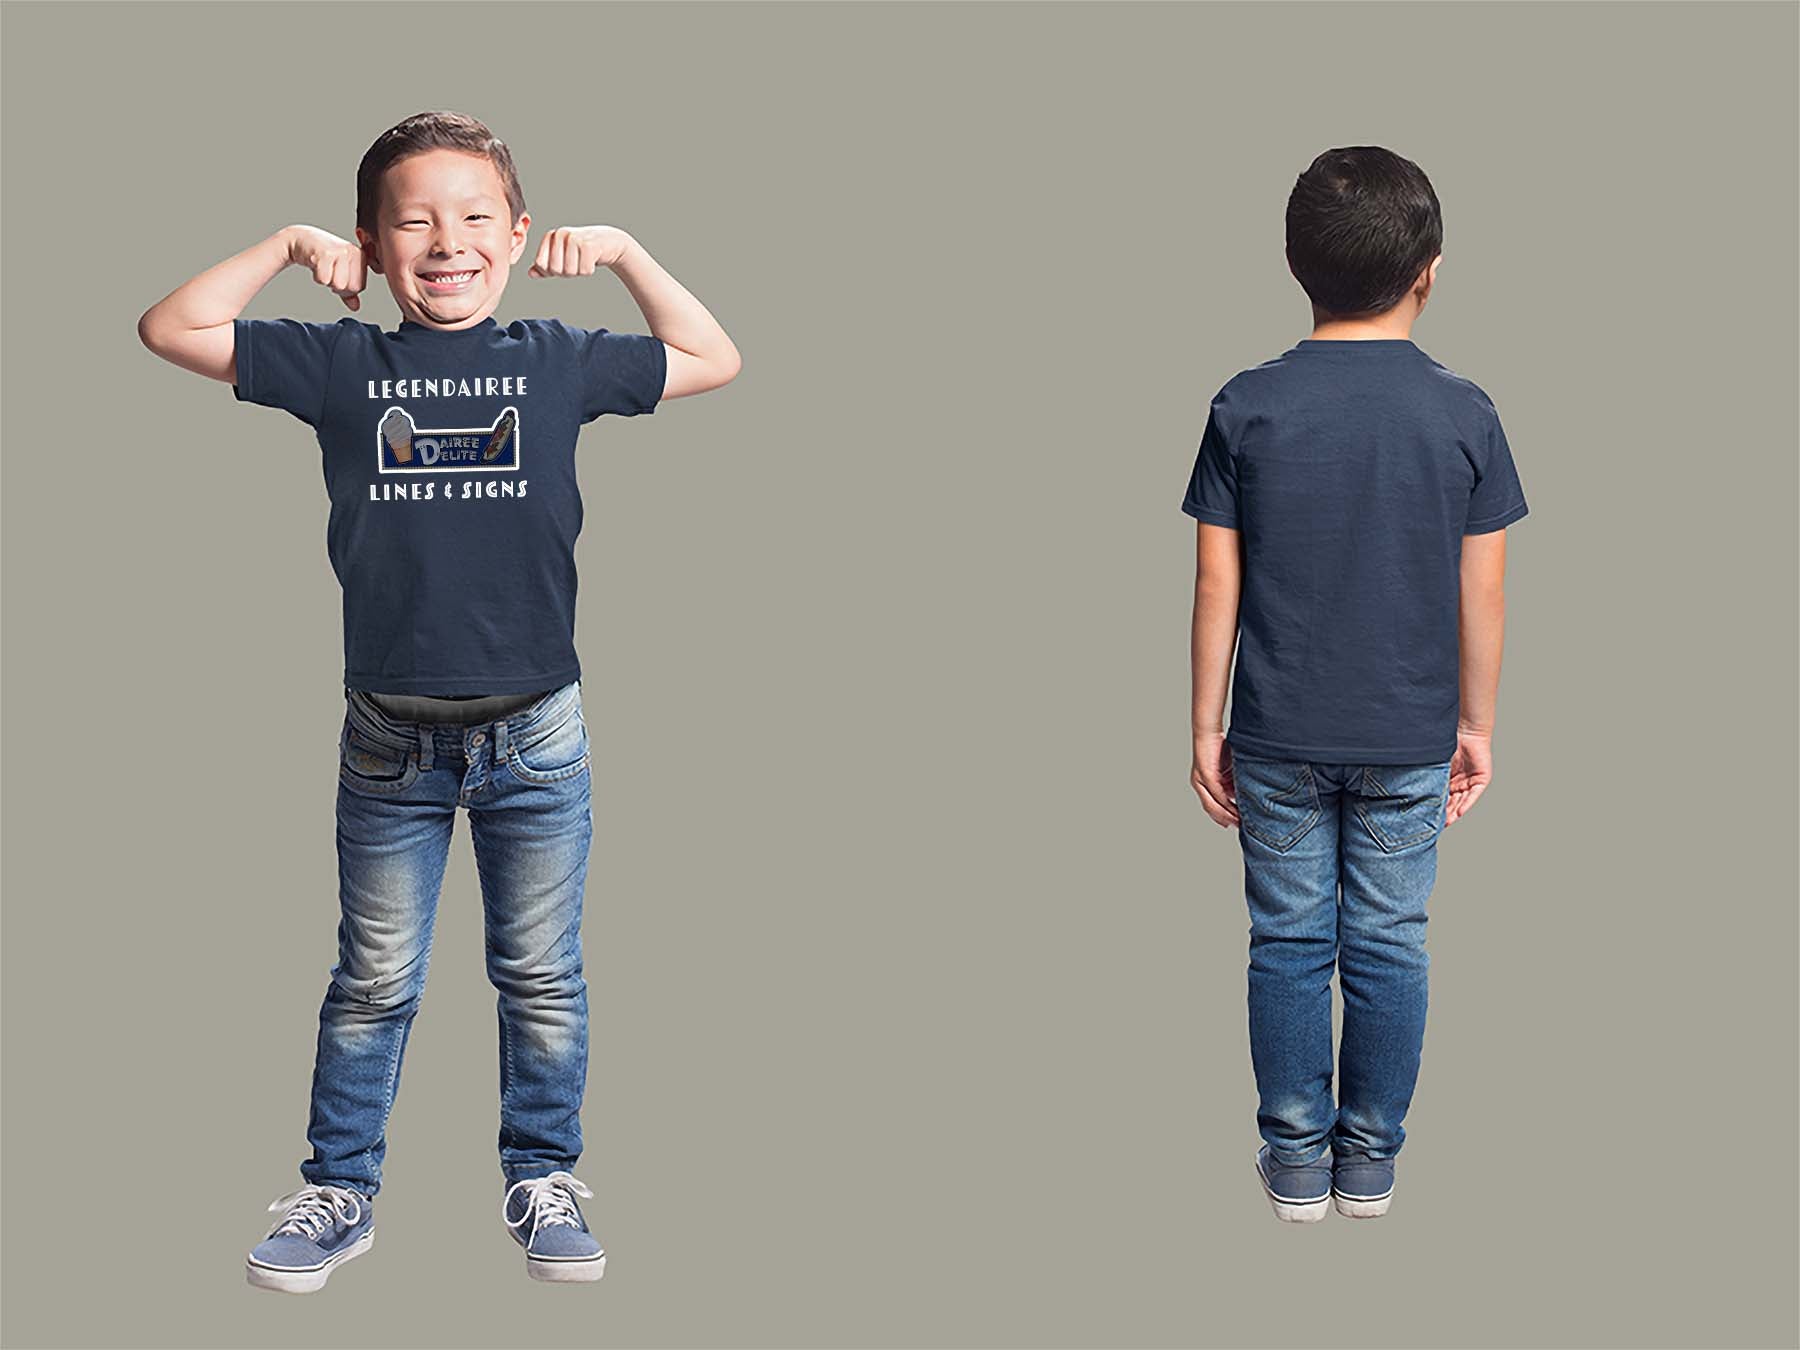 Legendairee Youth T-Shirt Youth Small Navy